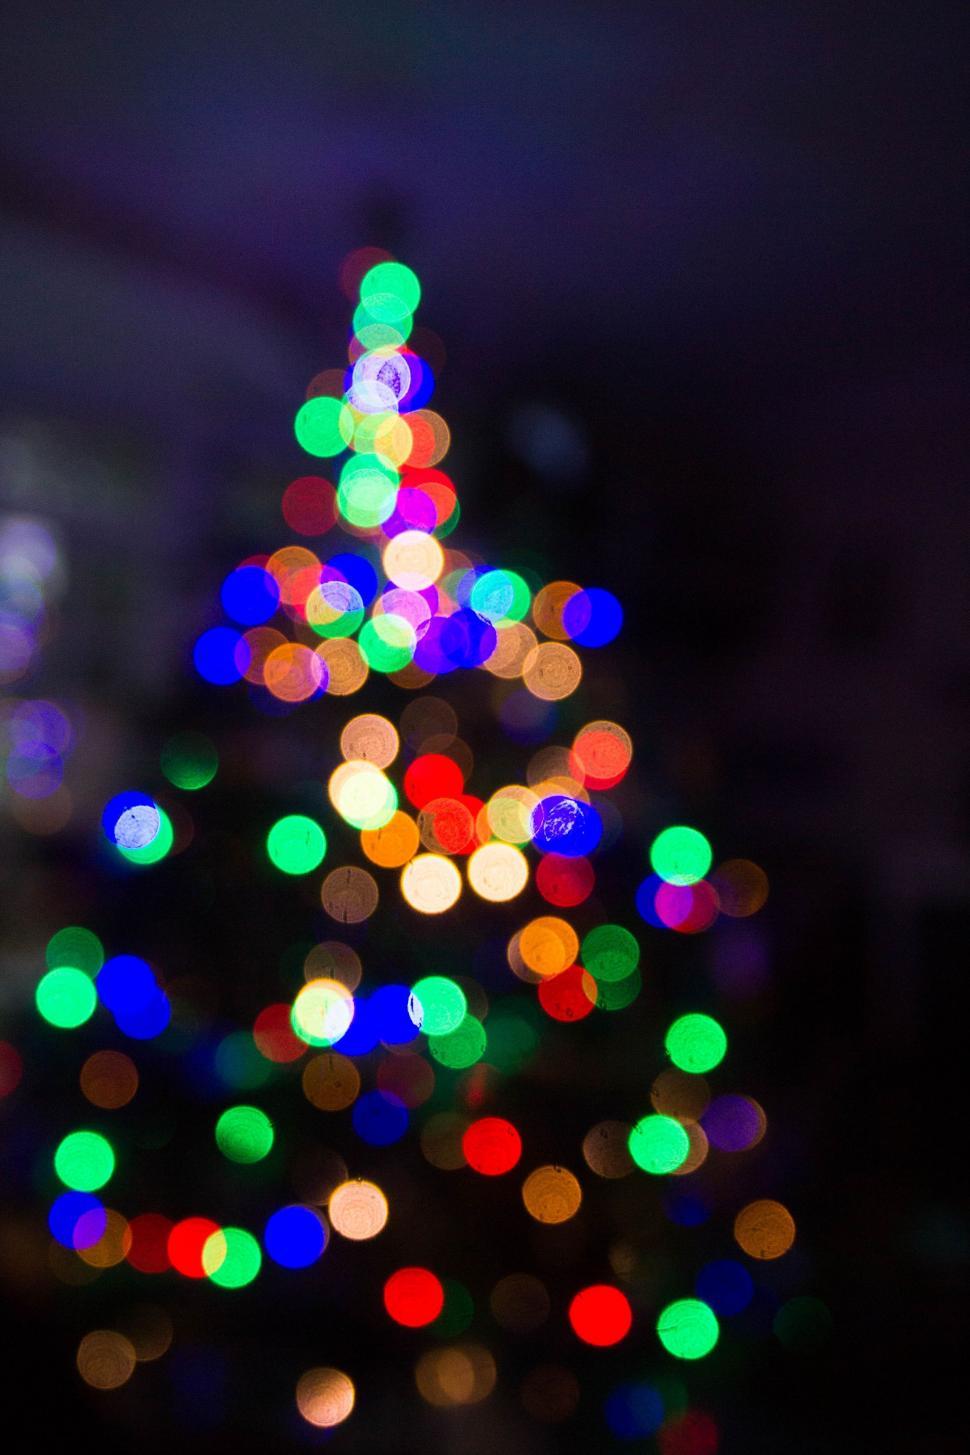 Free Image of Blurry Christmas Tree With Multicolored Lights 